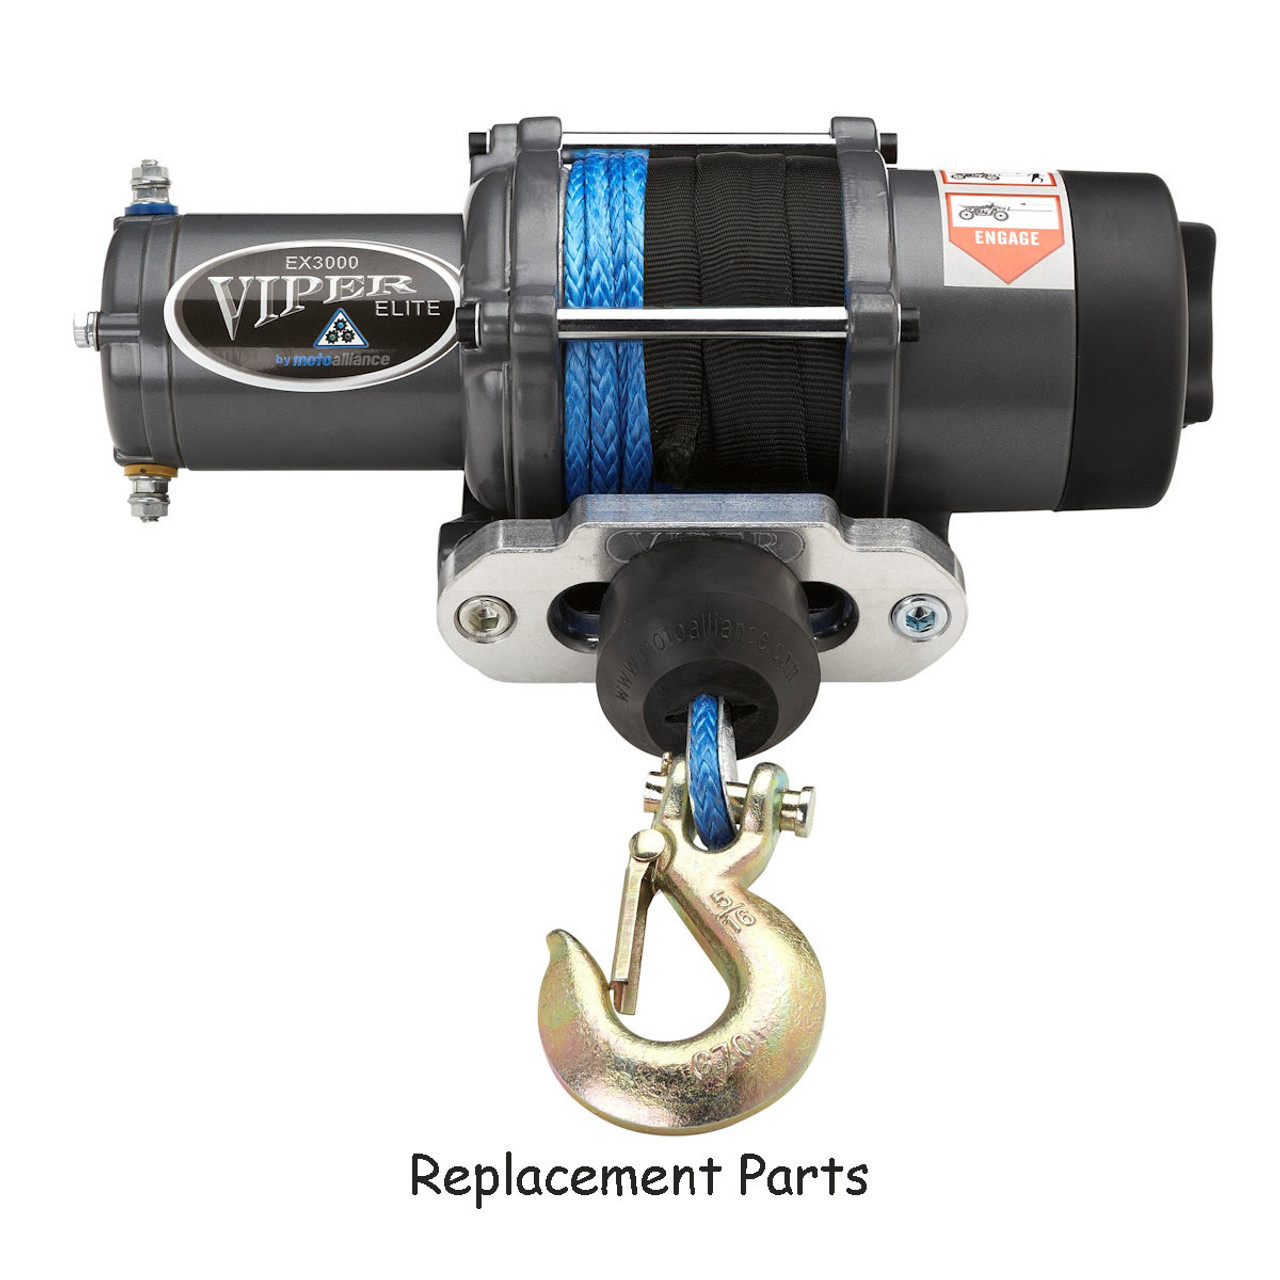 VIPER Replacement Parts for Elite Standard Spool Winch -3000-6000lb